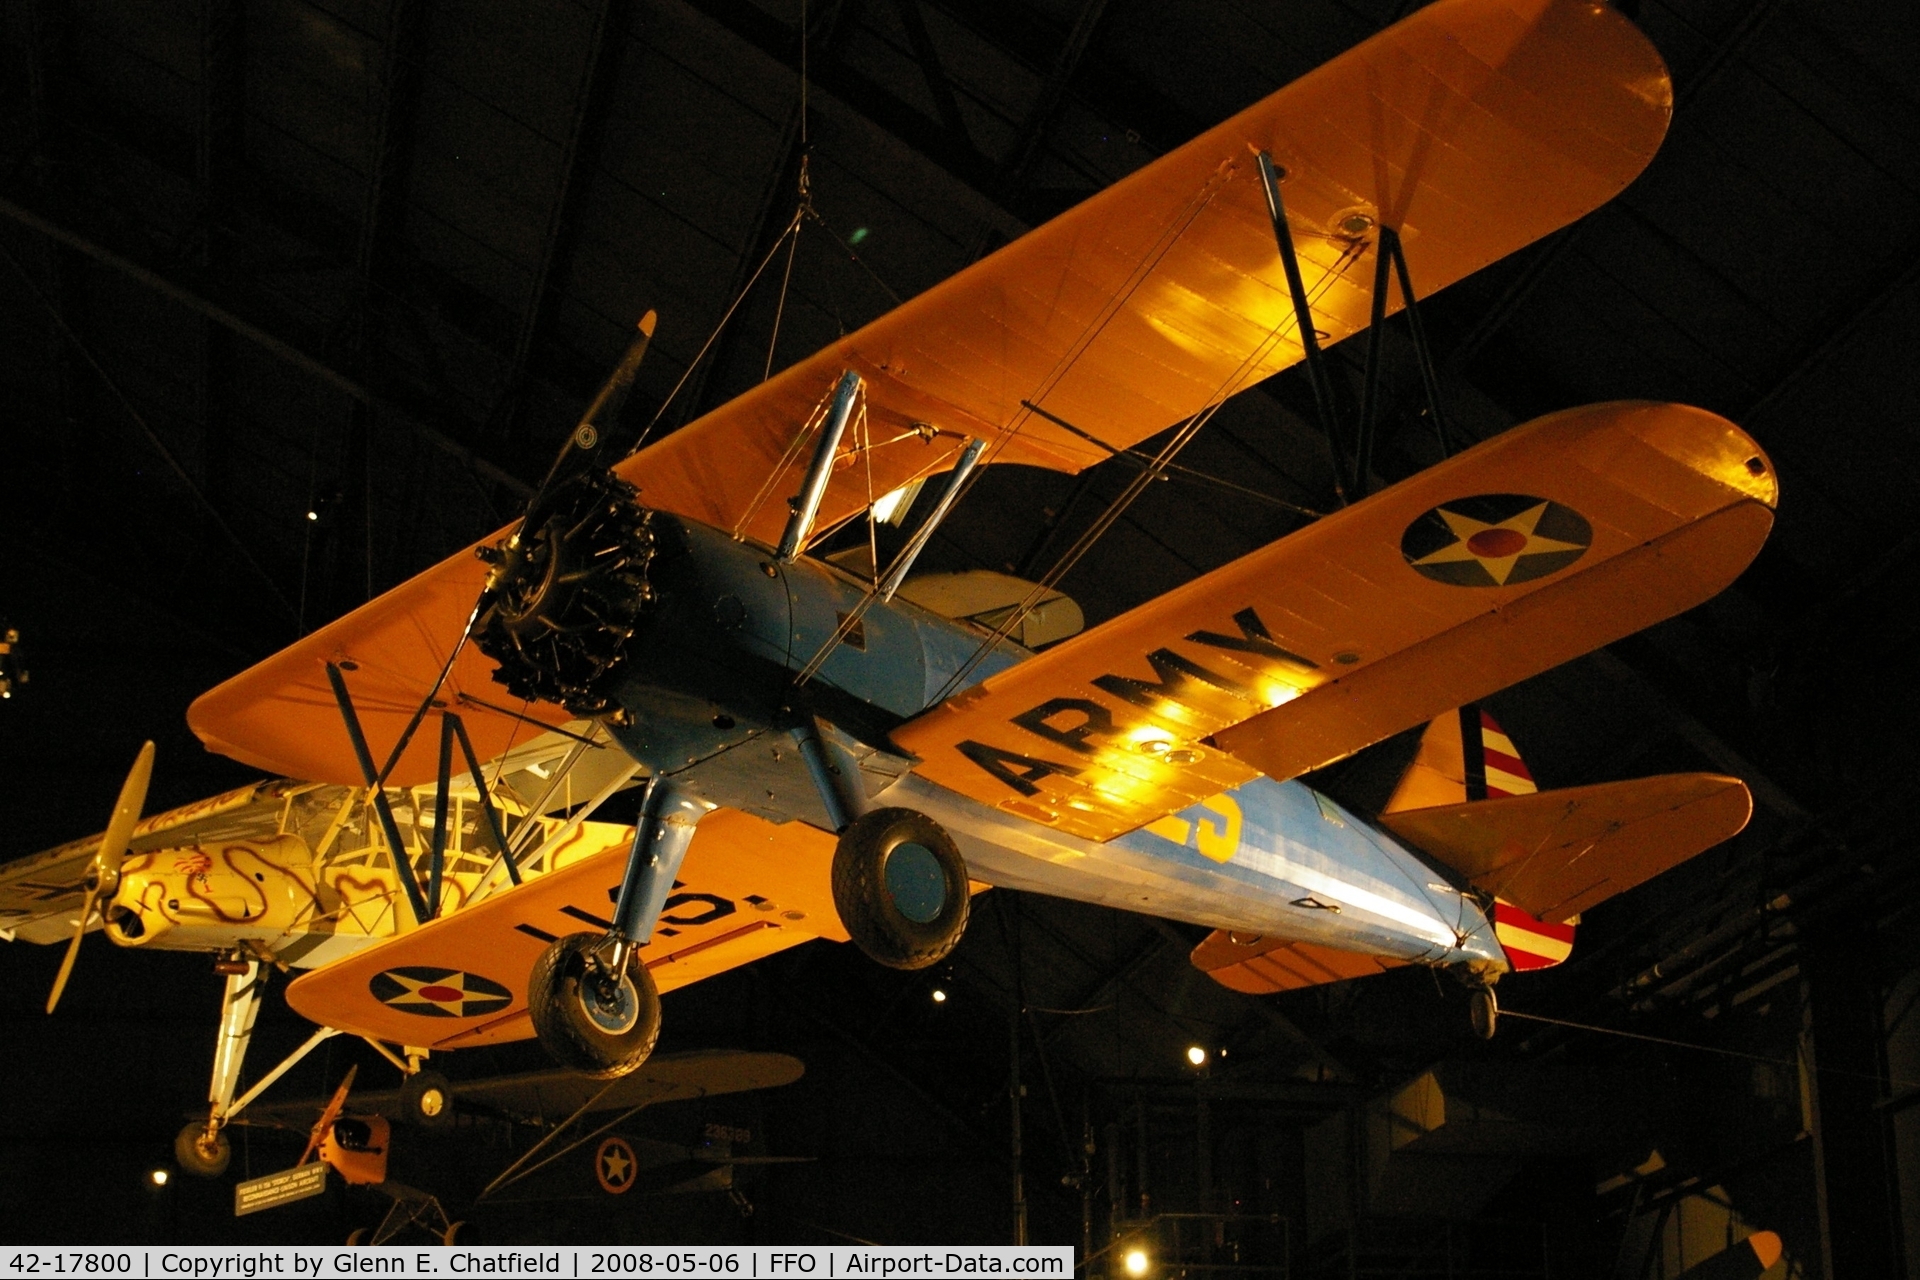 42-17800, Boeing PT-13D Kaydet (E75) C/N 75-5963, Hanging from the ceiling in the National Museum of the U.S. Air Force